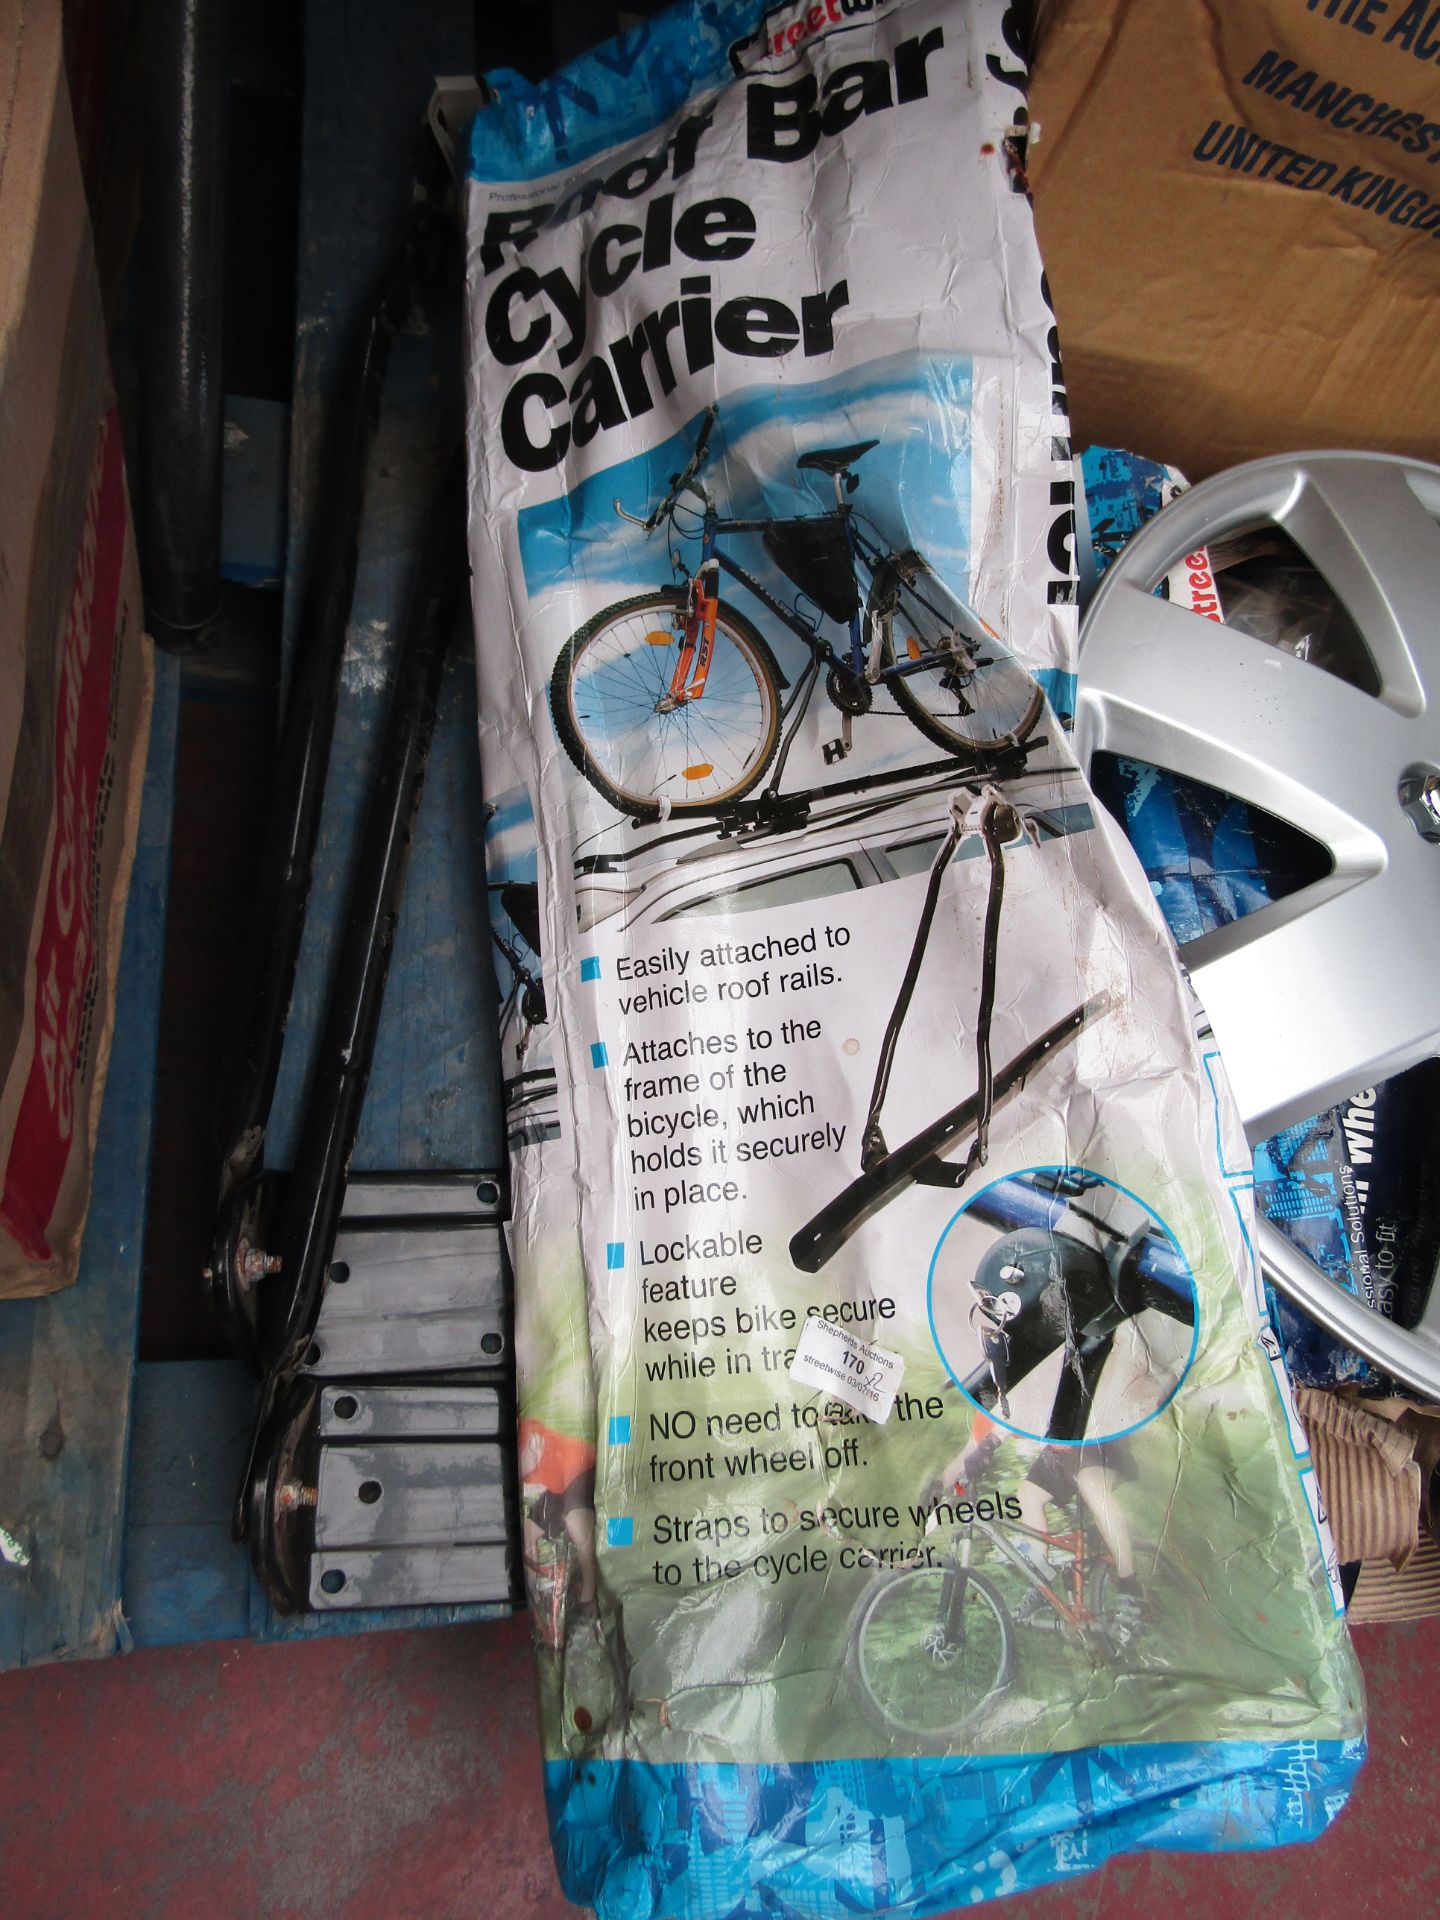 Set of 2 Streetwise of roof Bar Cycle Carriers, one boxed and one not, the unboxed one is missing